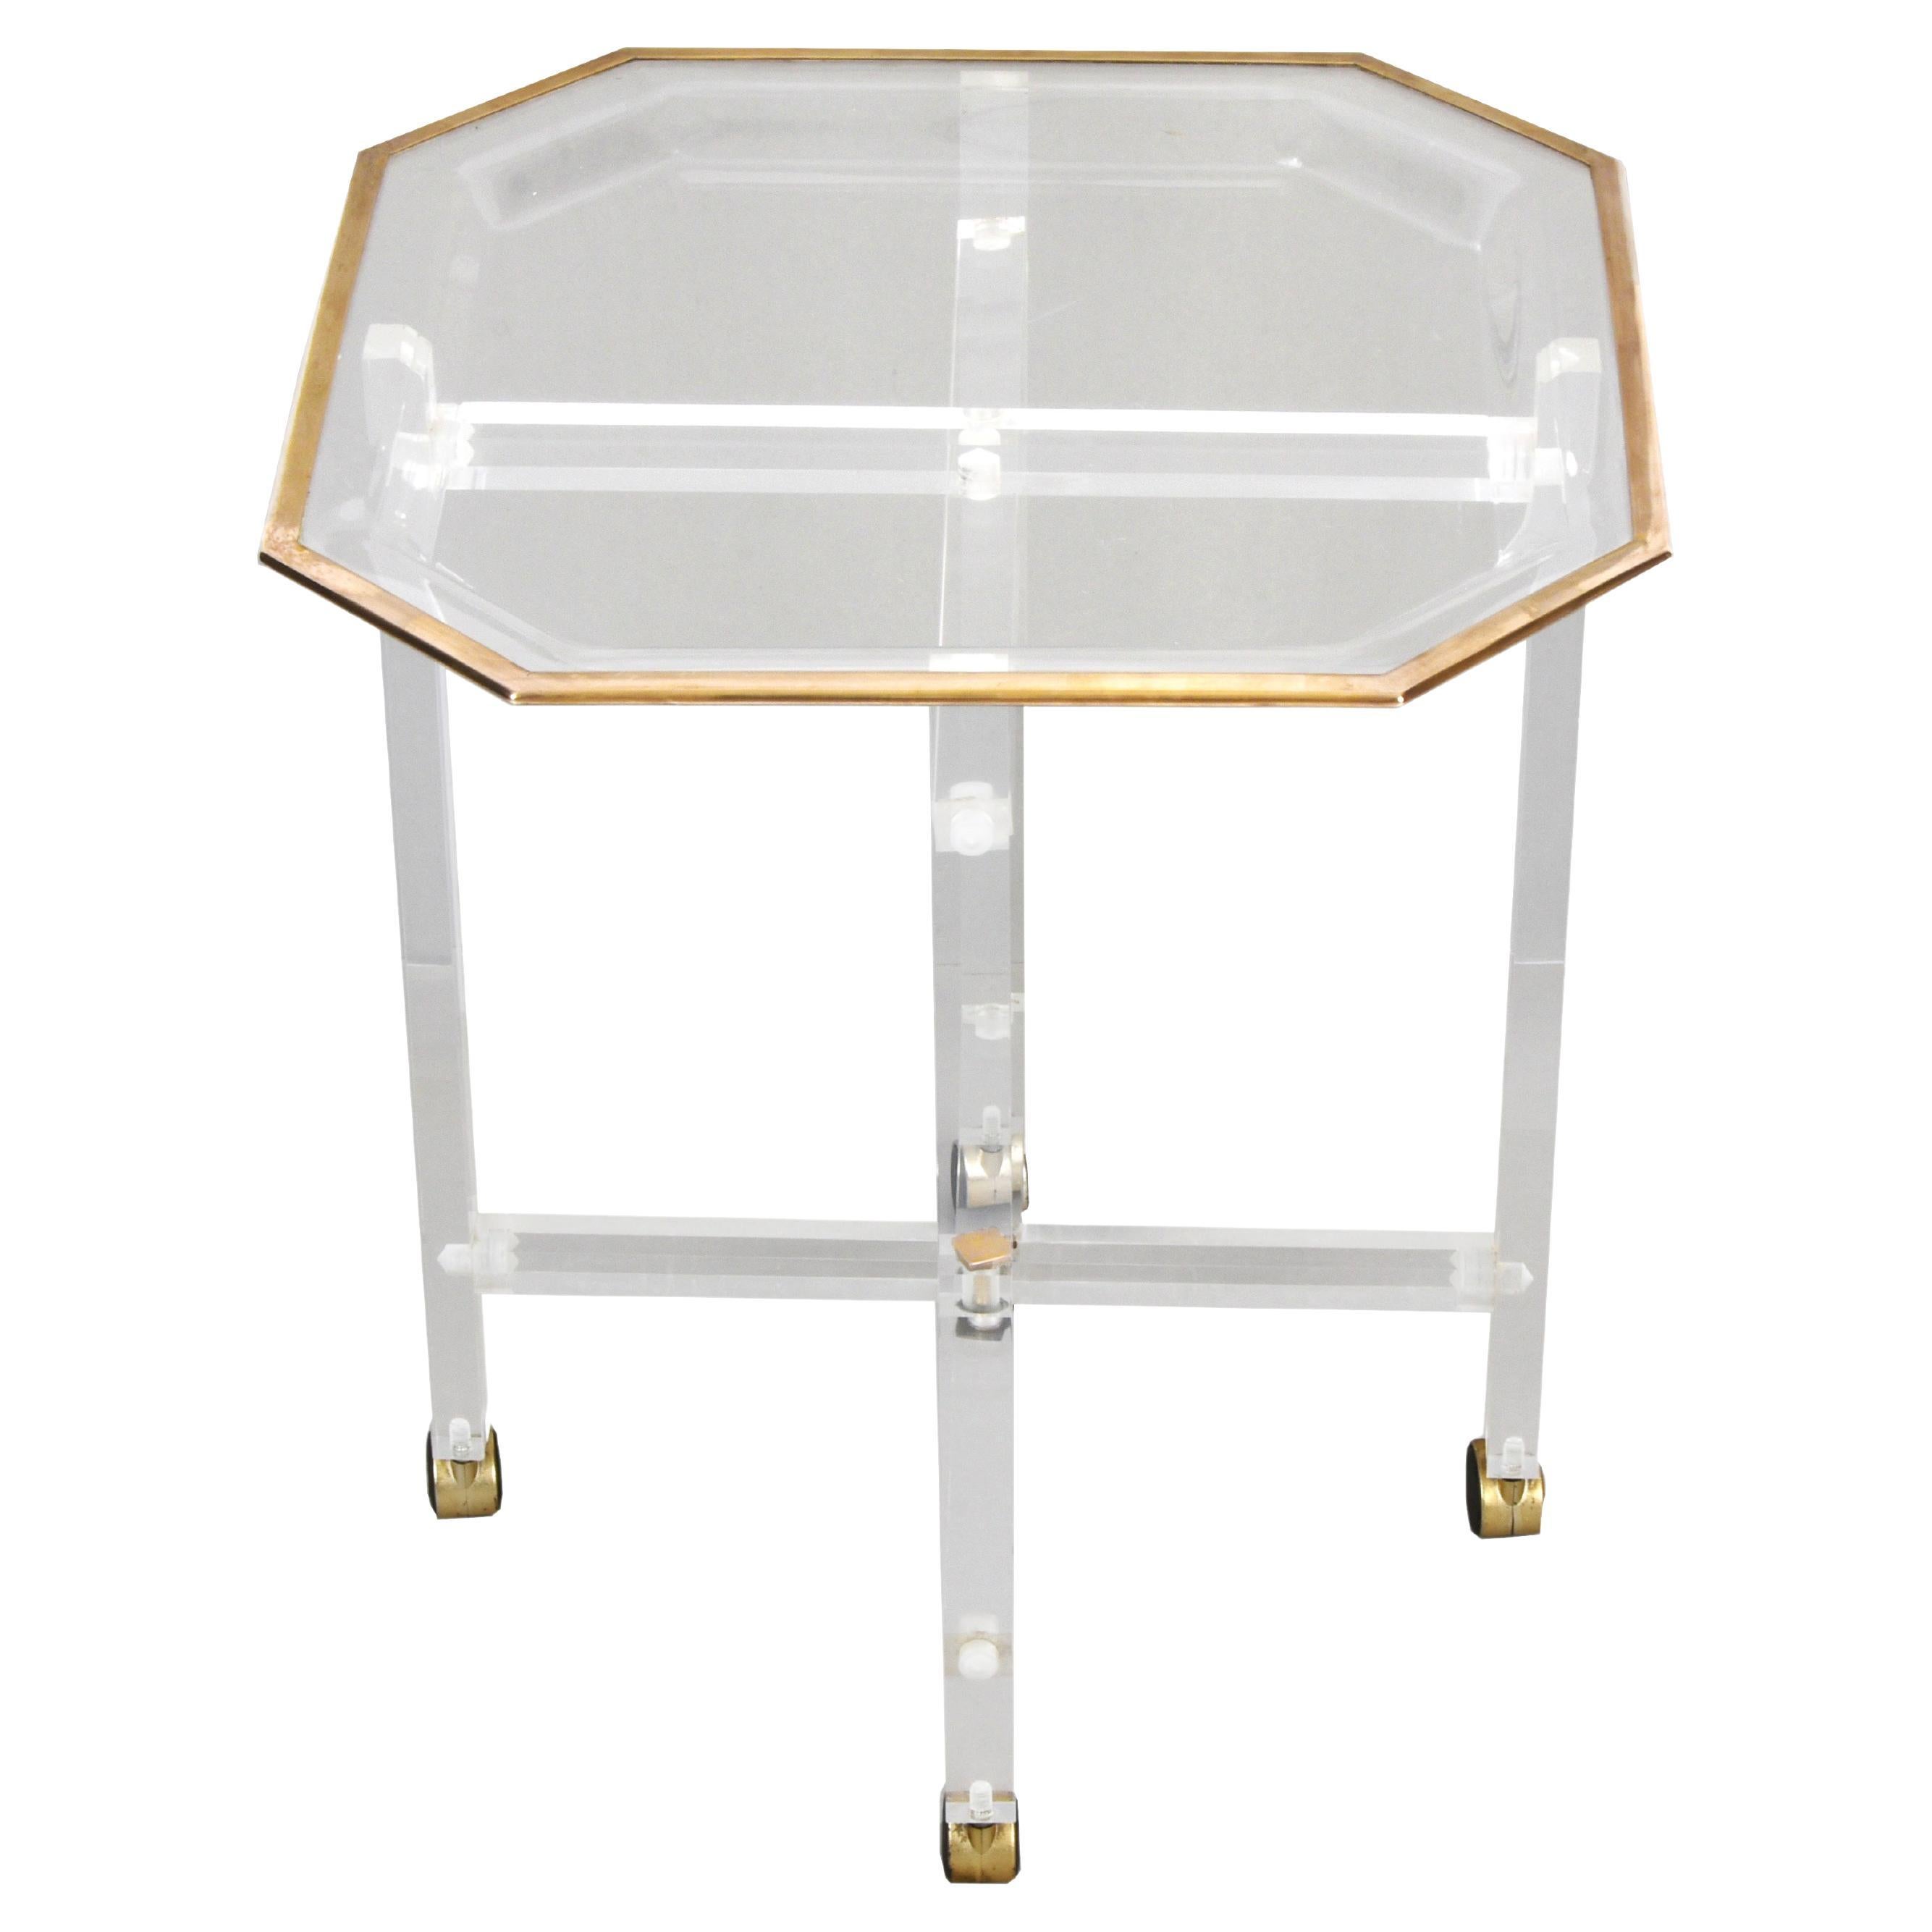 Midcentury Christian Dior Octagonal Lucite and Brass Coffee Table with Tray